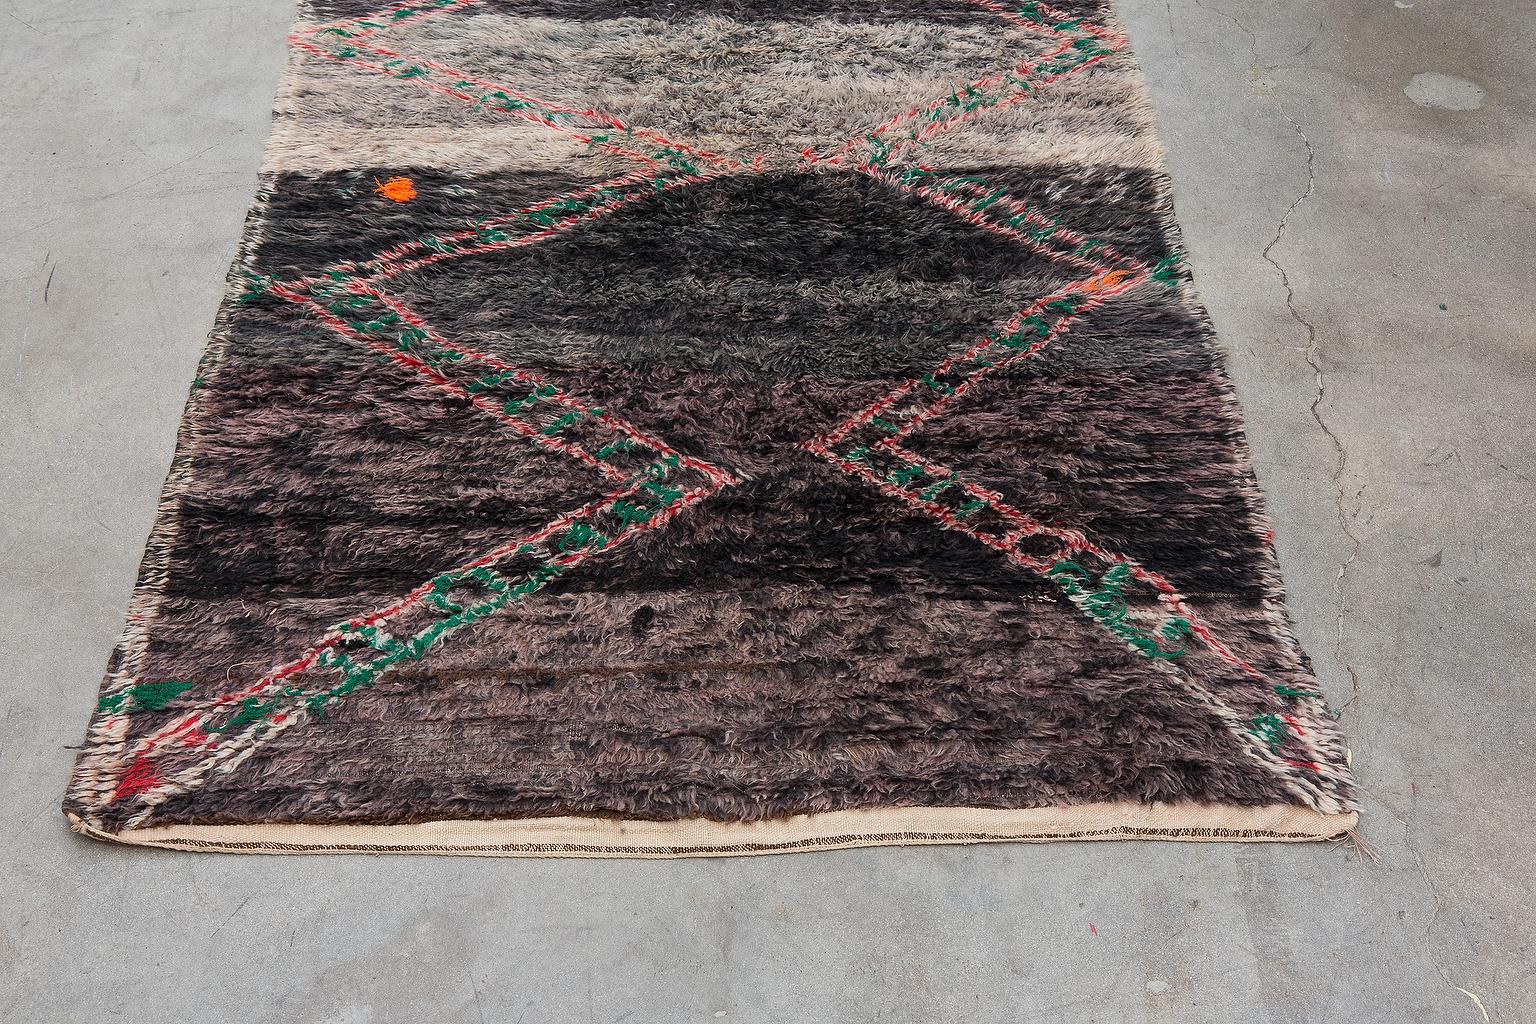 Beni M’rirt is a neighbouring region to the Beni Ourain Tribe. Traditionally Beni M’Rirt carpets tended to be darker colored with very Primitive symbols, however, recently their carpets are influenced by the popular soft ivory carpets with